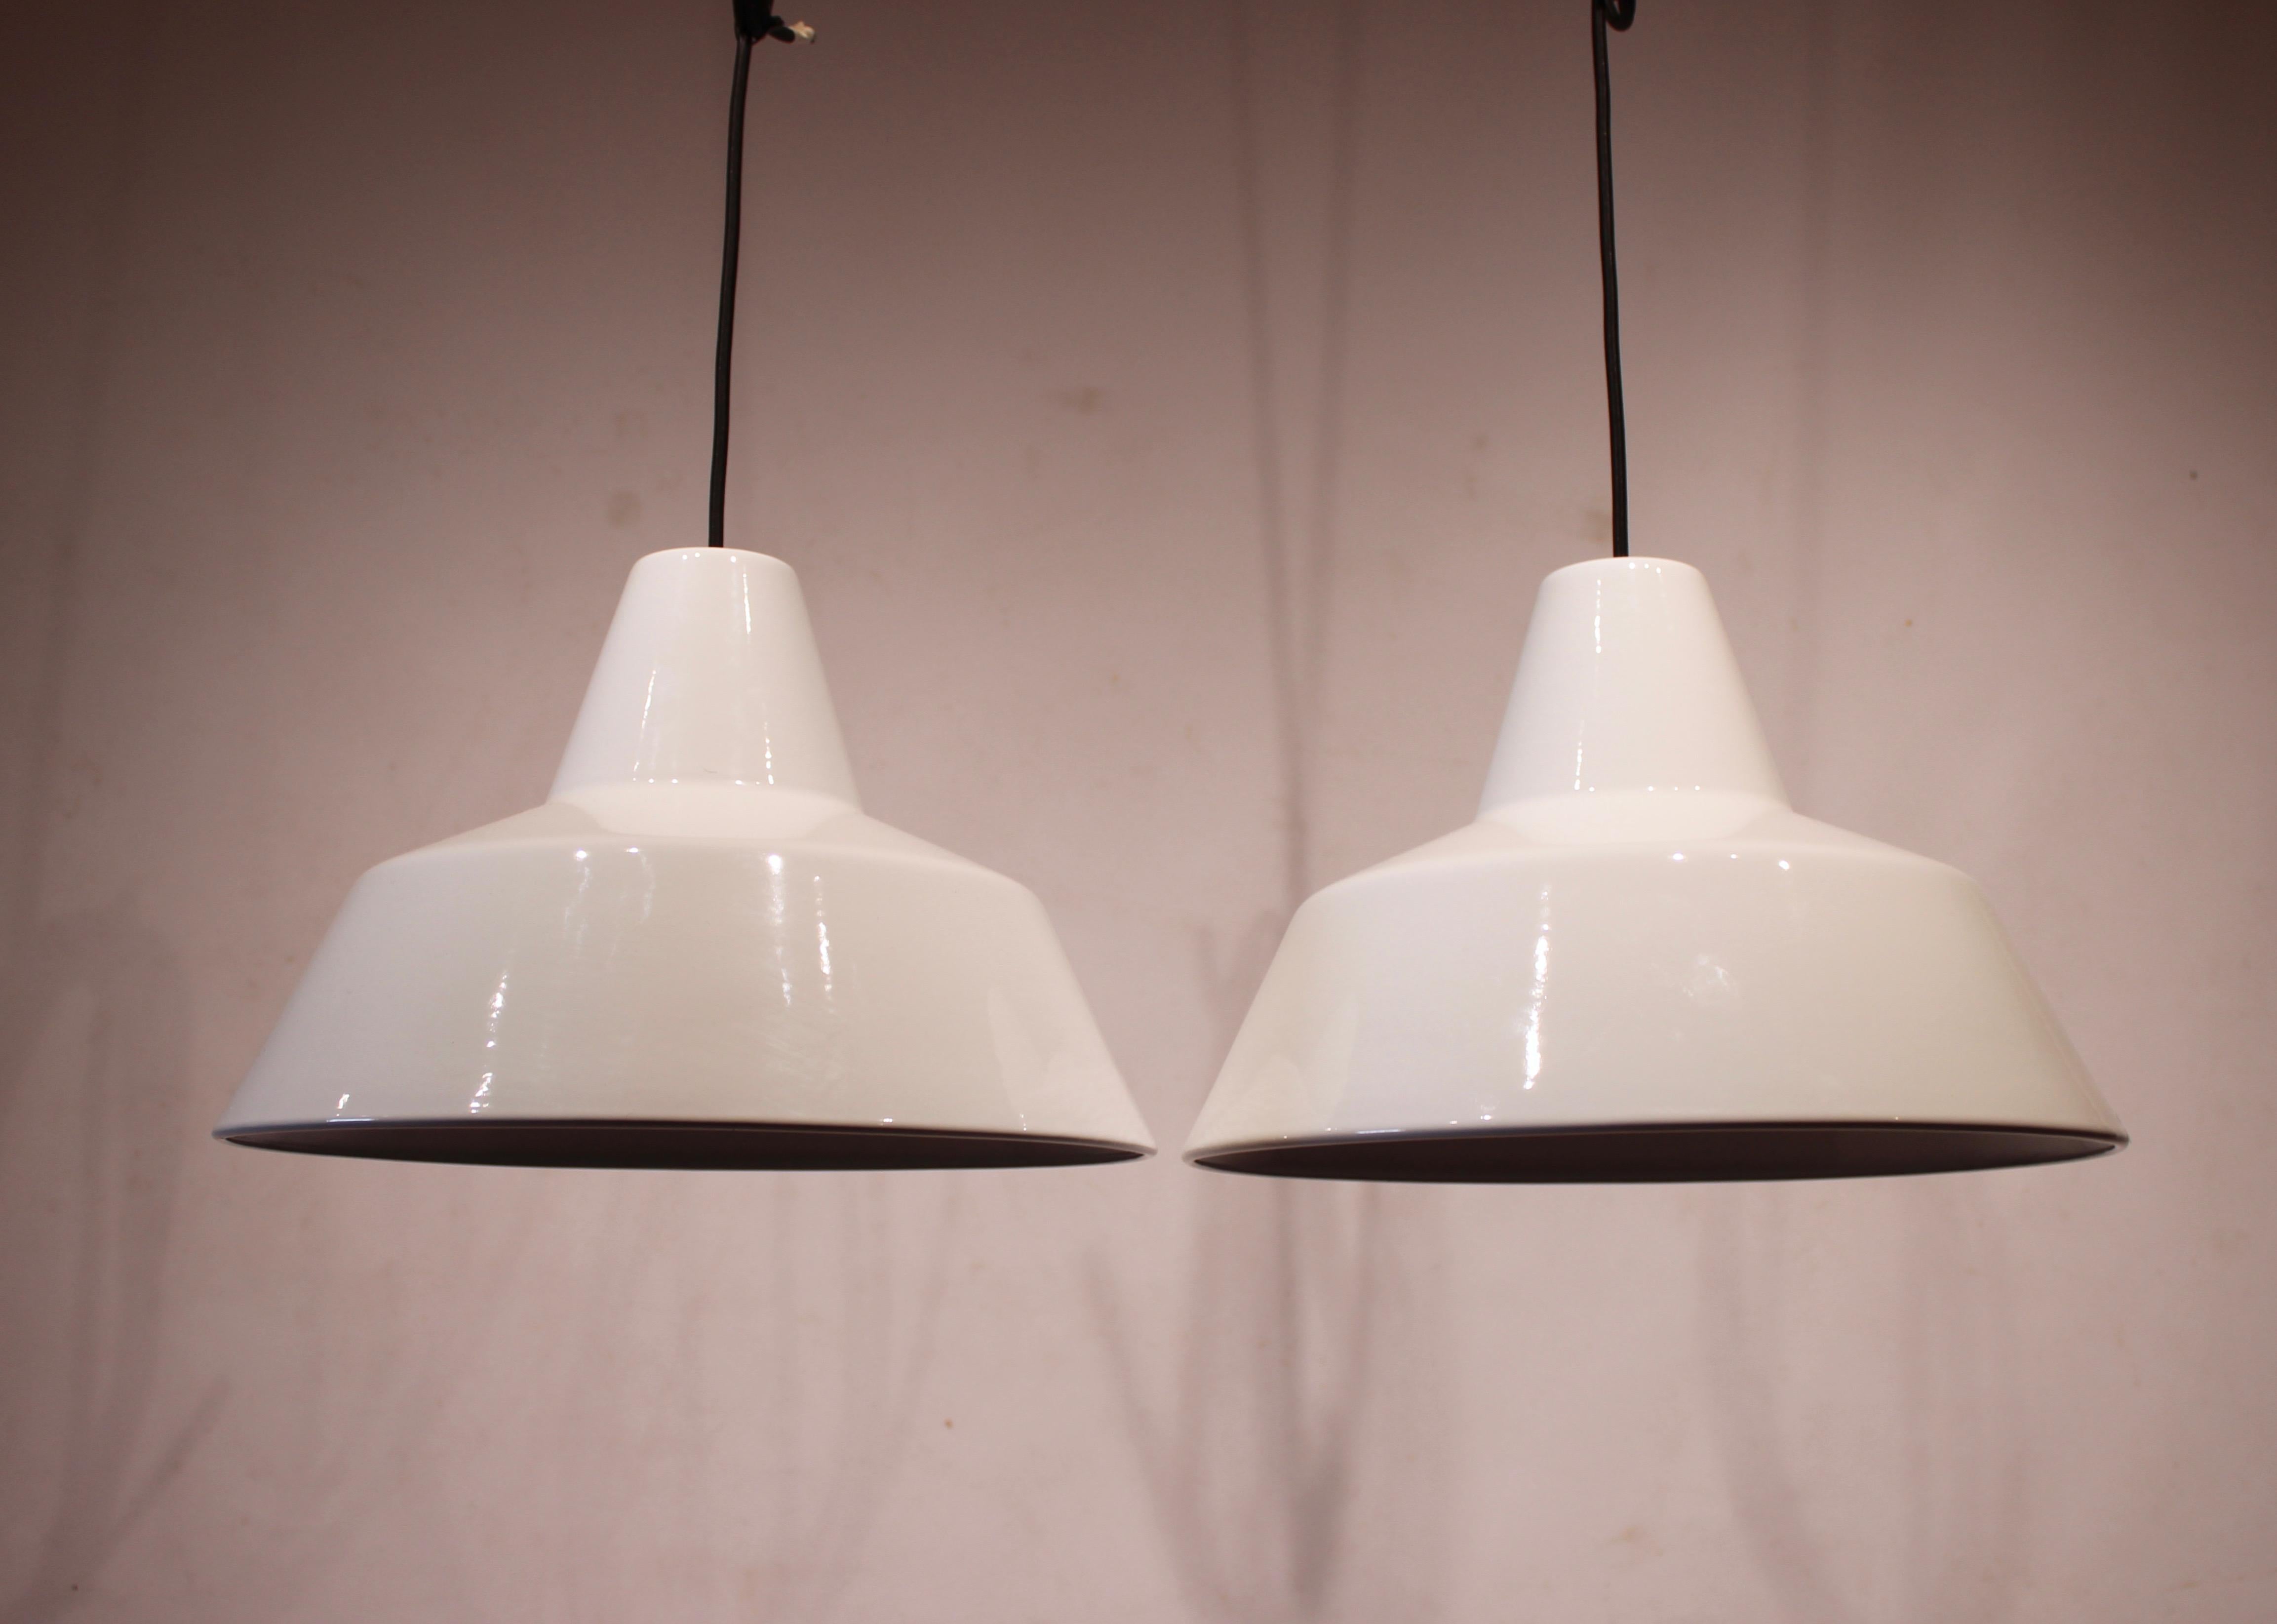 A pair of white workshop lamps designed by Louis Poulsen from the 1970s is a charming and functional find that showcases the enduring appeal of industrial design.

Louis Poulsen, a renowned Danish lighting manufacturer, is known for its high-quality